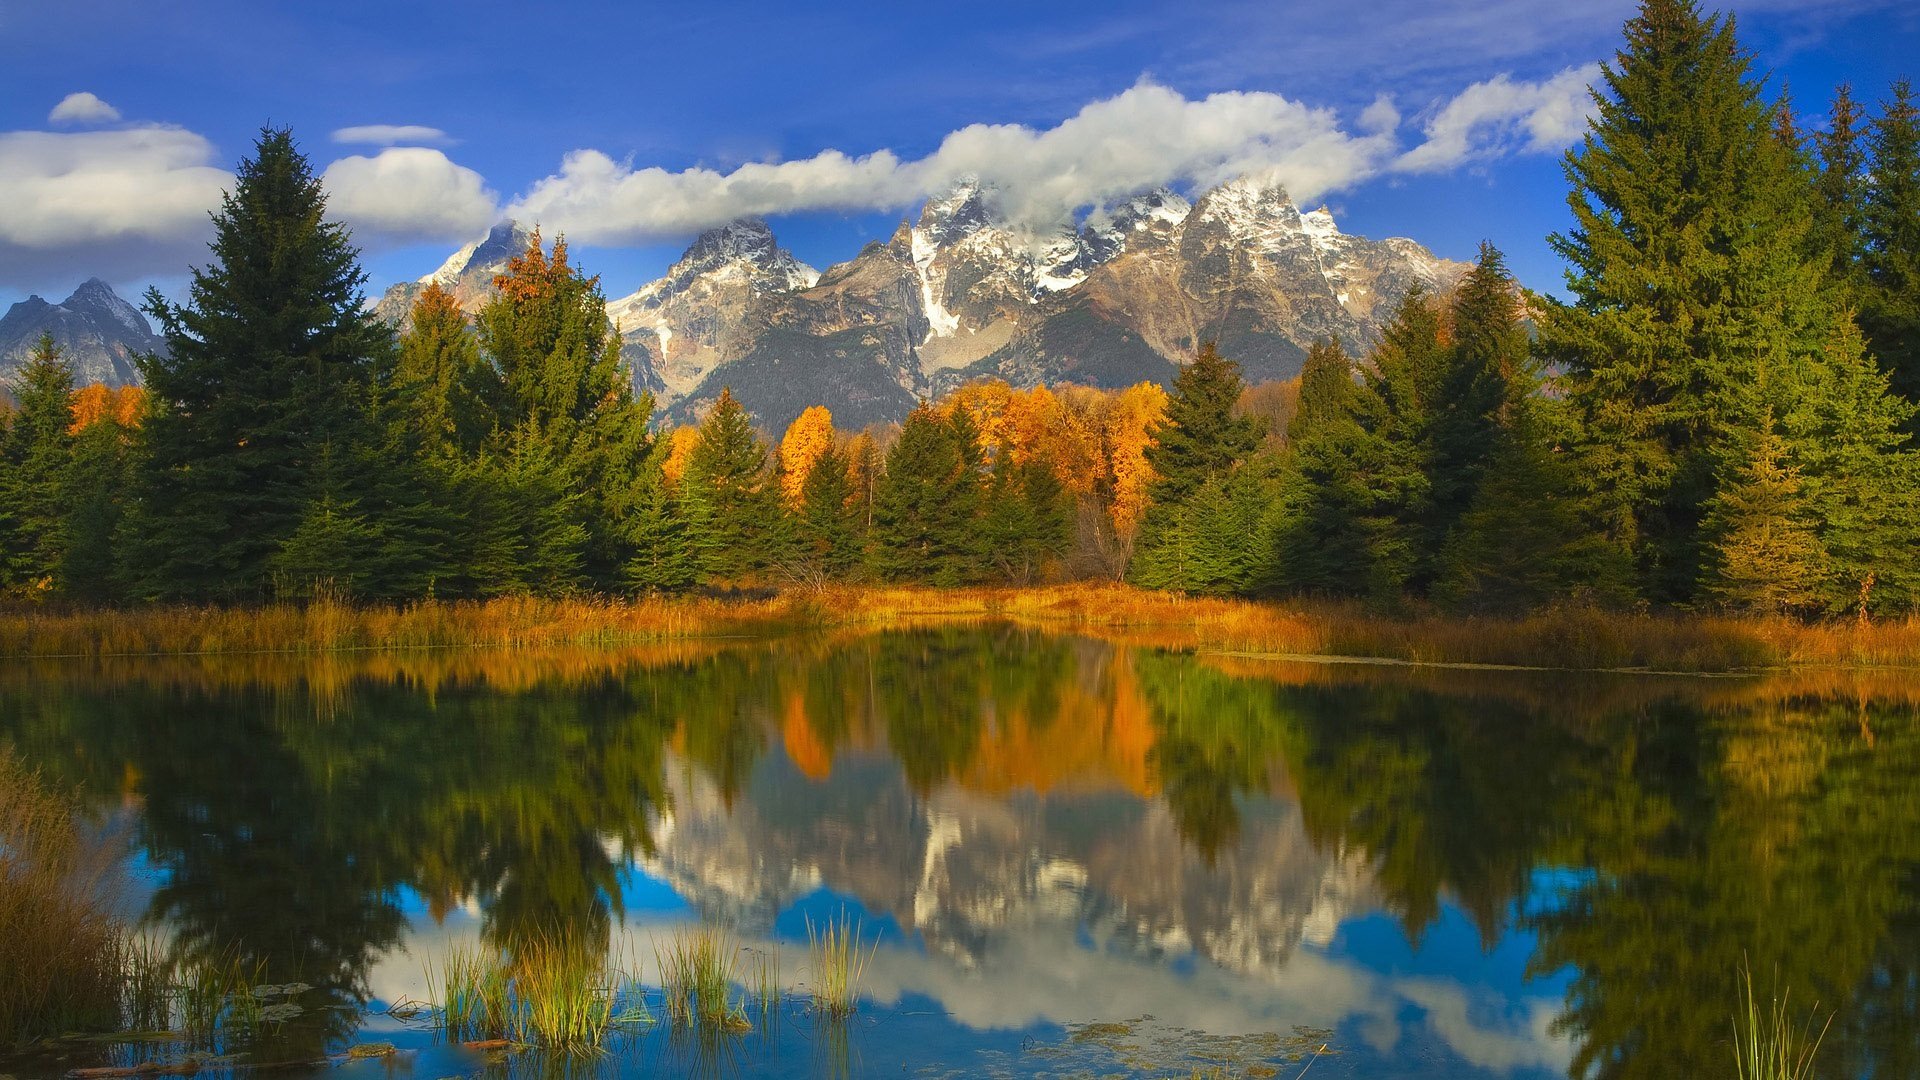 lake, In, The, Valley, Reflection, On, Mountains, Dropped, The, Clouds, Autumn, Reflection Wallpaper